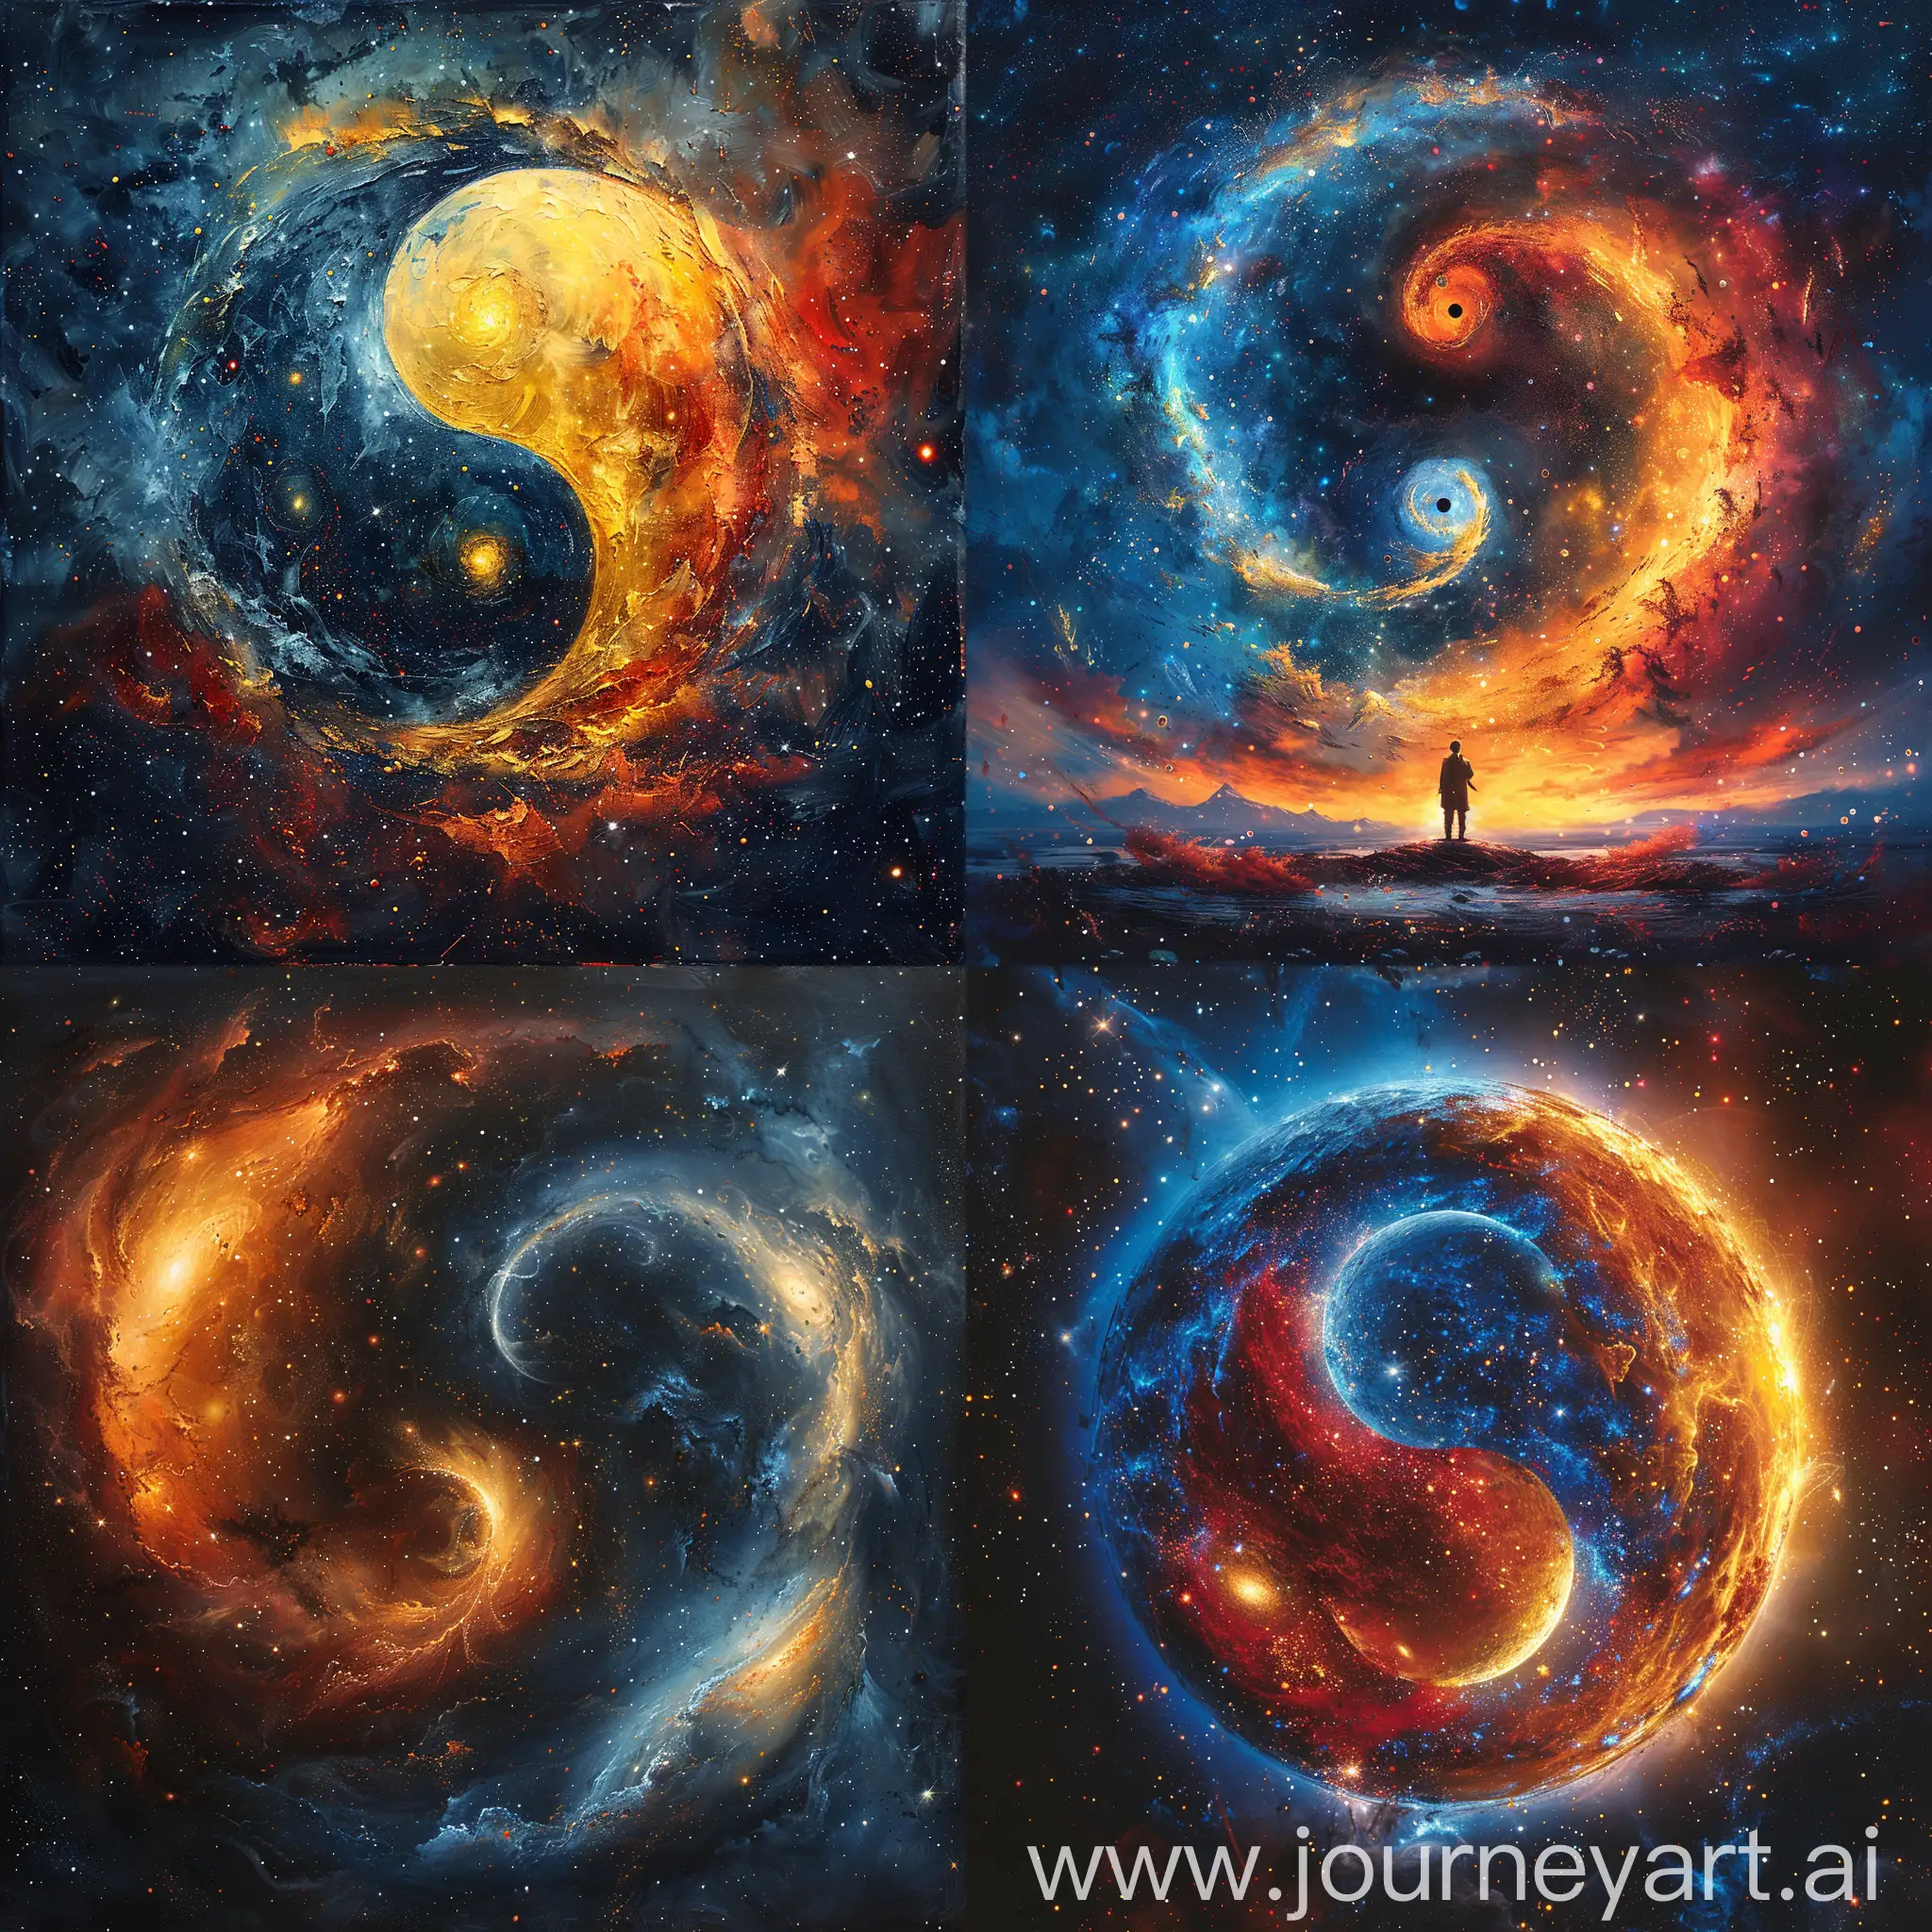 Surreal-Yin-and-Yang-Space-Composition-in-Galaxy